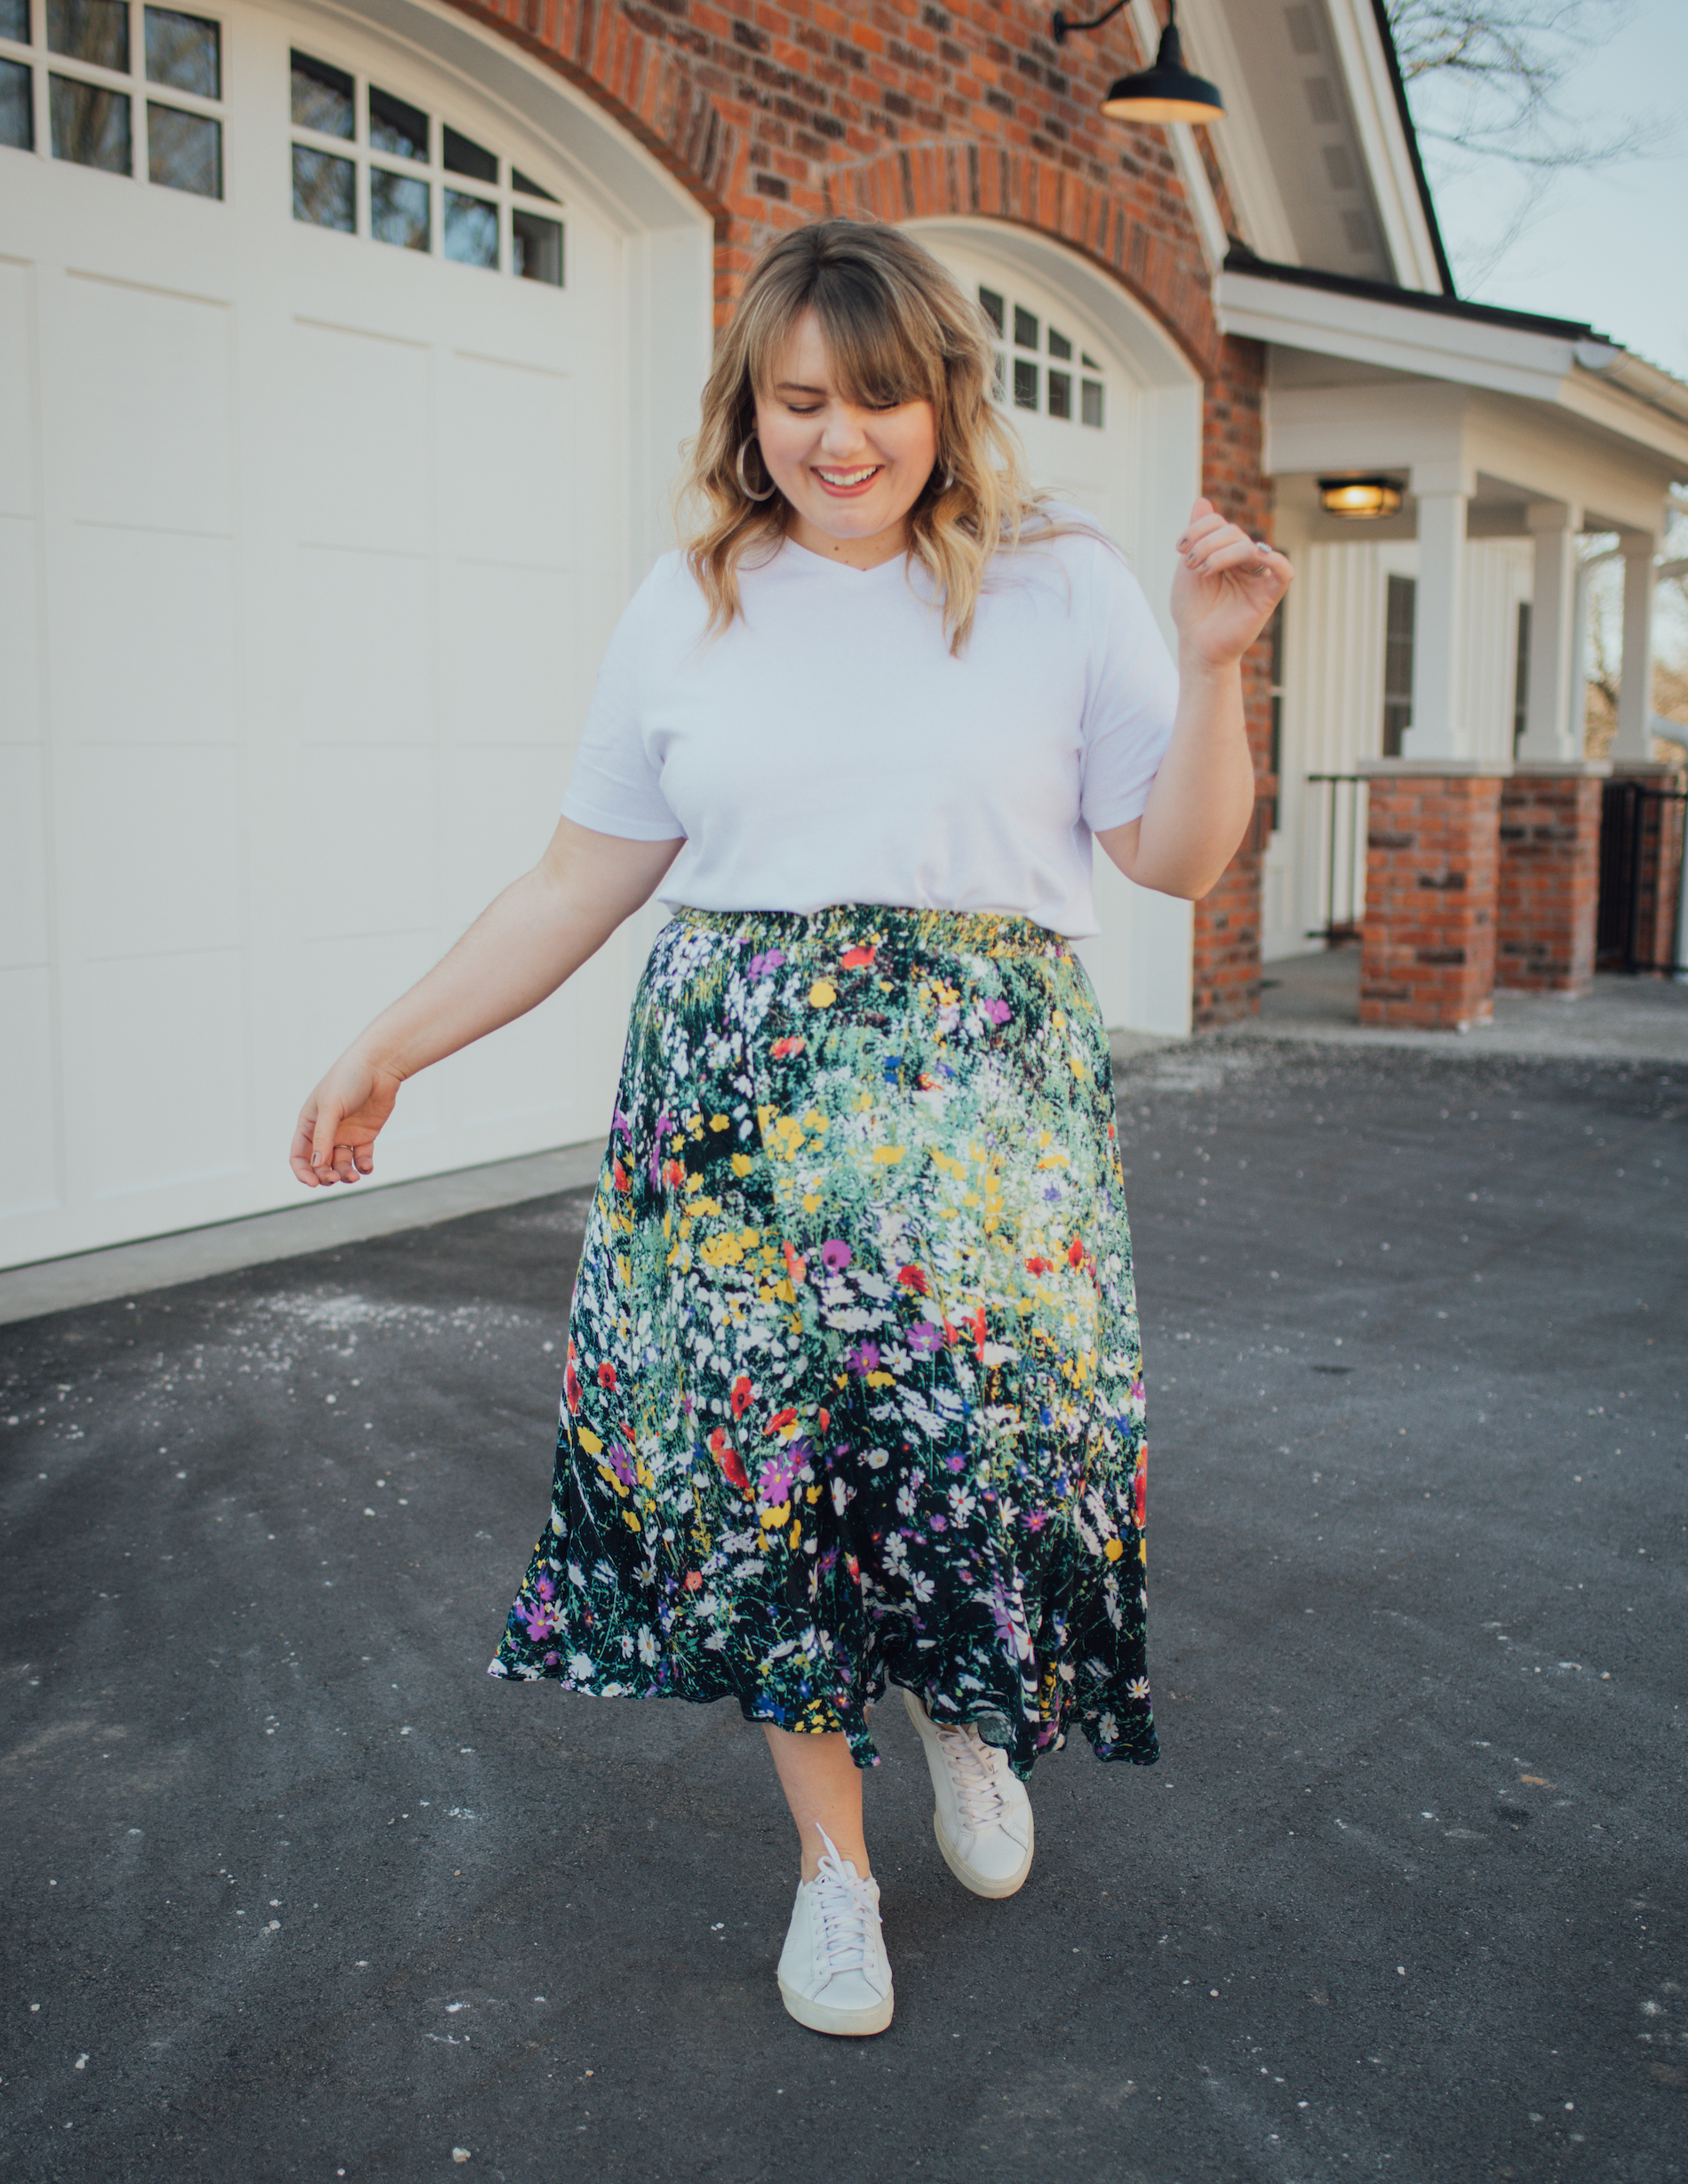 Spring Skirt + Tee. Sharing a way to wear your skirts with a simple tee and skirt for spring and summer. Midi skirts pair so well with a tee. 